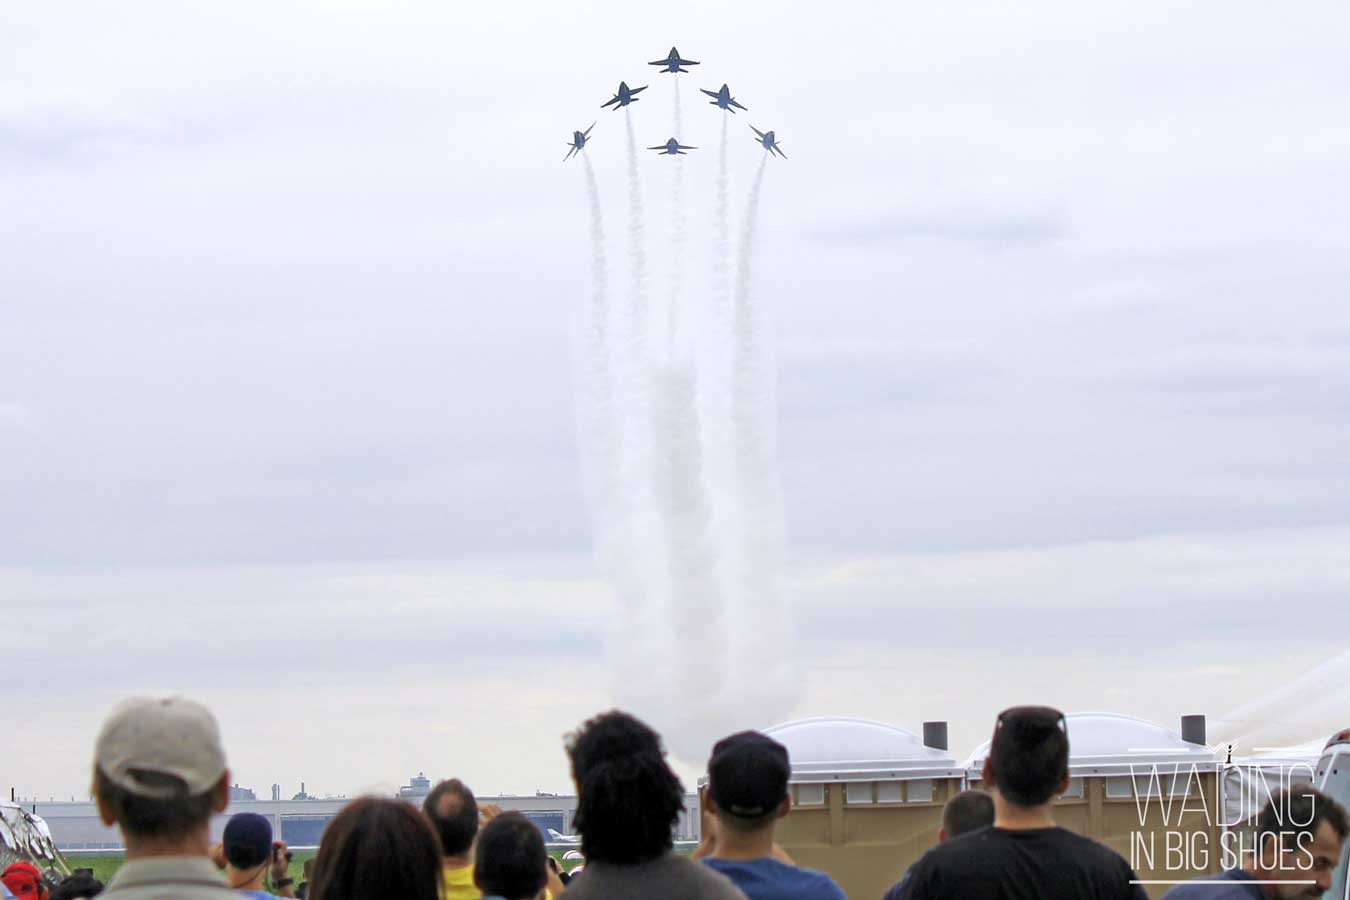 What To Expect When You Visit The Thunder Over Michigan Air Show | via Wading in Big Shoes